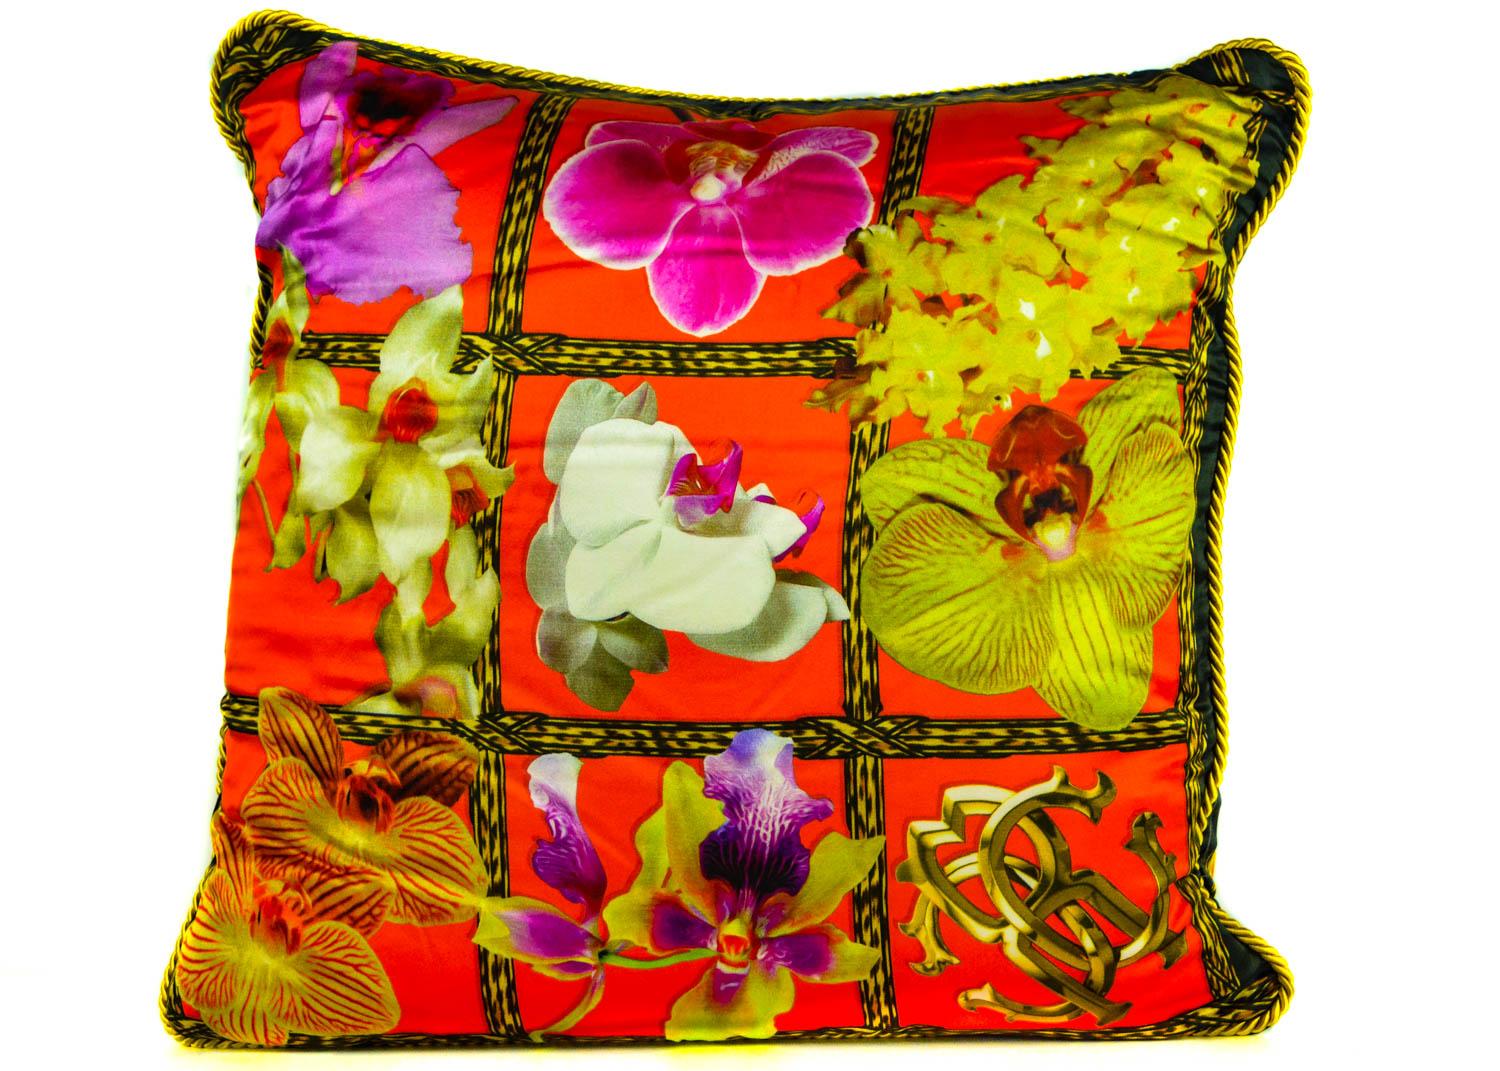 Add elegance to the home with this orchid print patterned foulard cushion from Roberto Cavalli. Adorned with a chic orange background, this cushion features a striking different kind orchid pattern and border detail. Made from indulgent 100% silk,